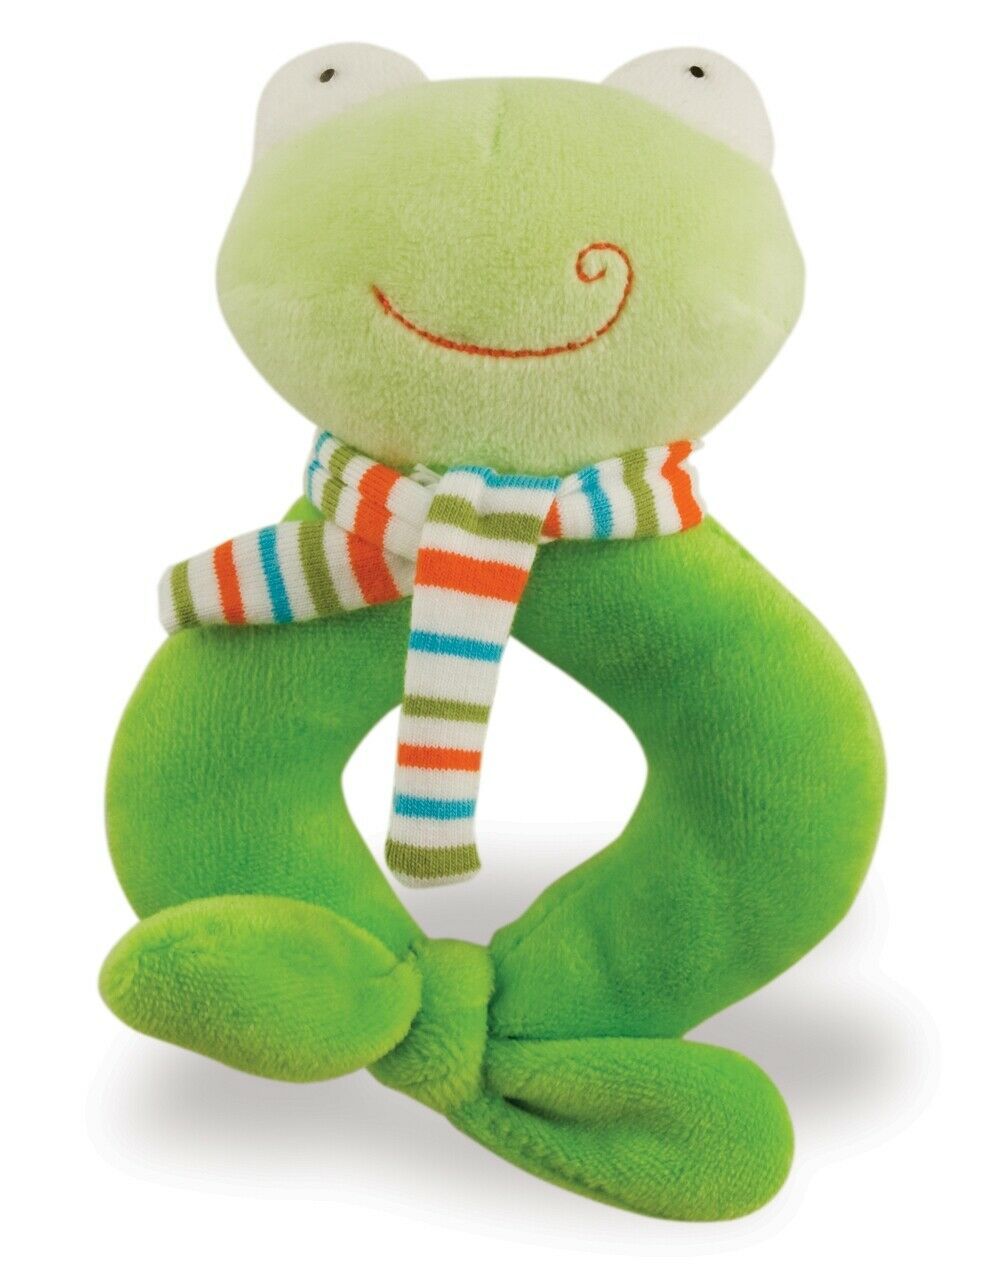 Rich Frog RING RATTLE FROG baby plush rattle toy NEW with tag green frog